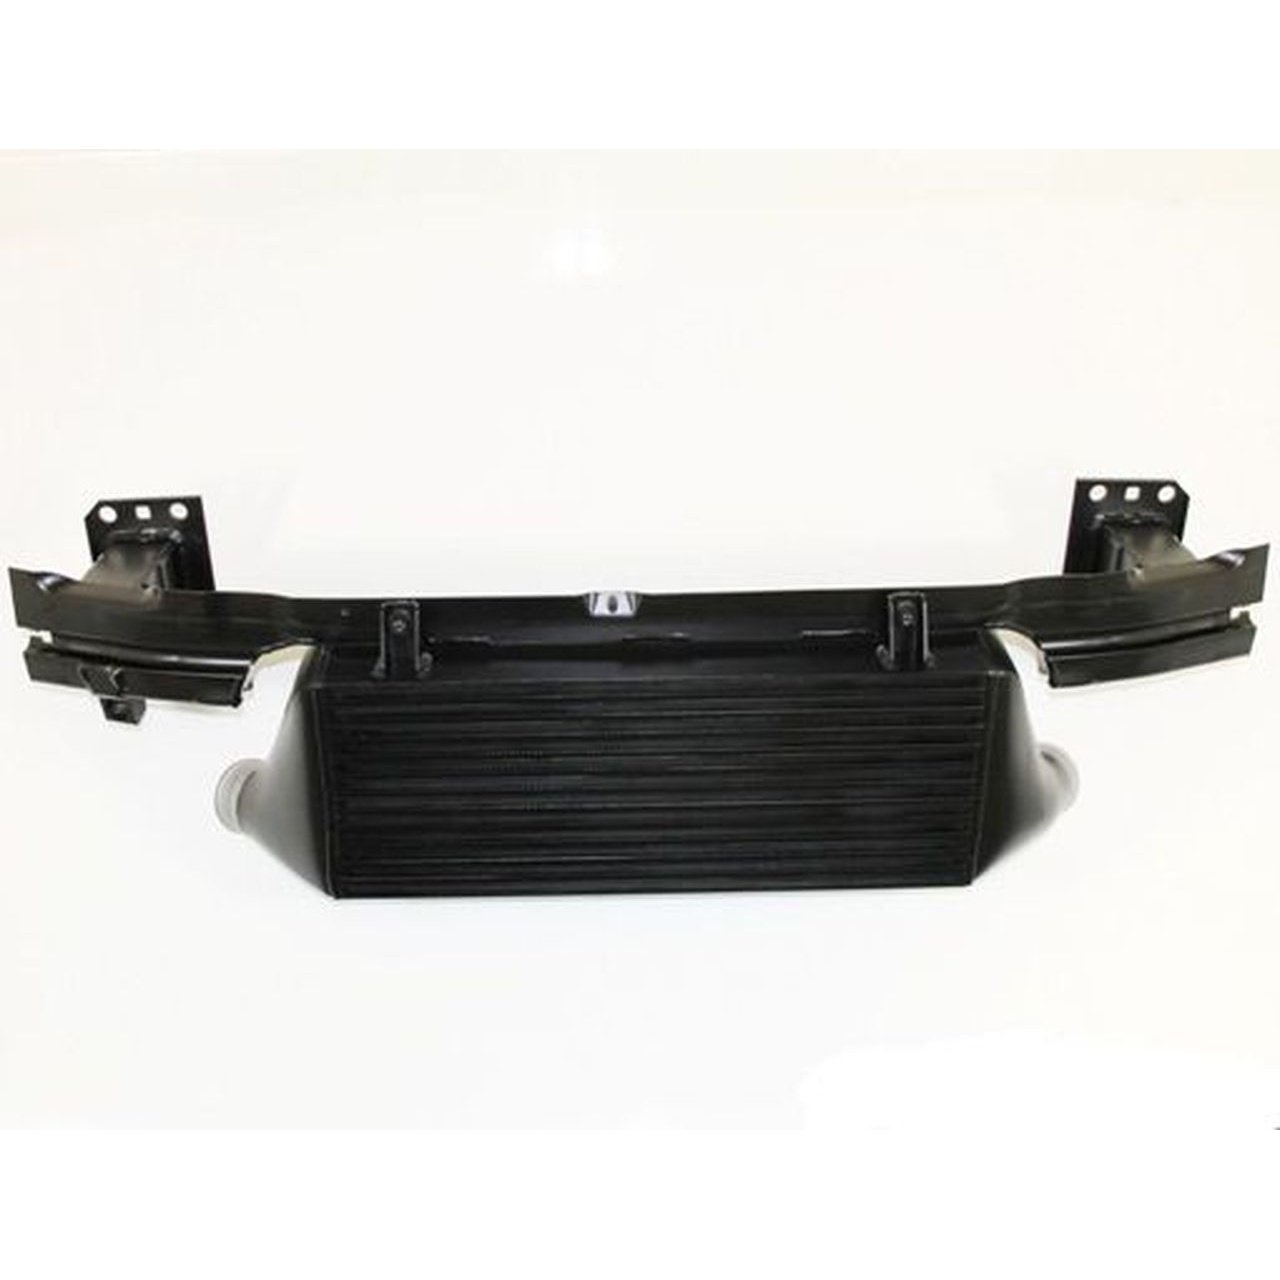 Forge Uprated Intercooler For Audi